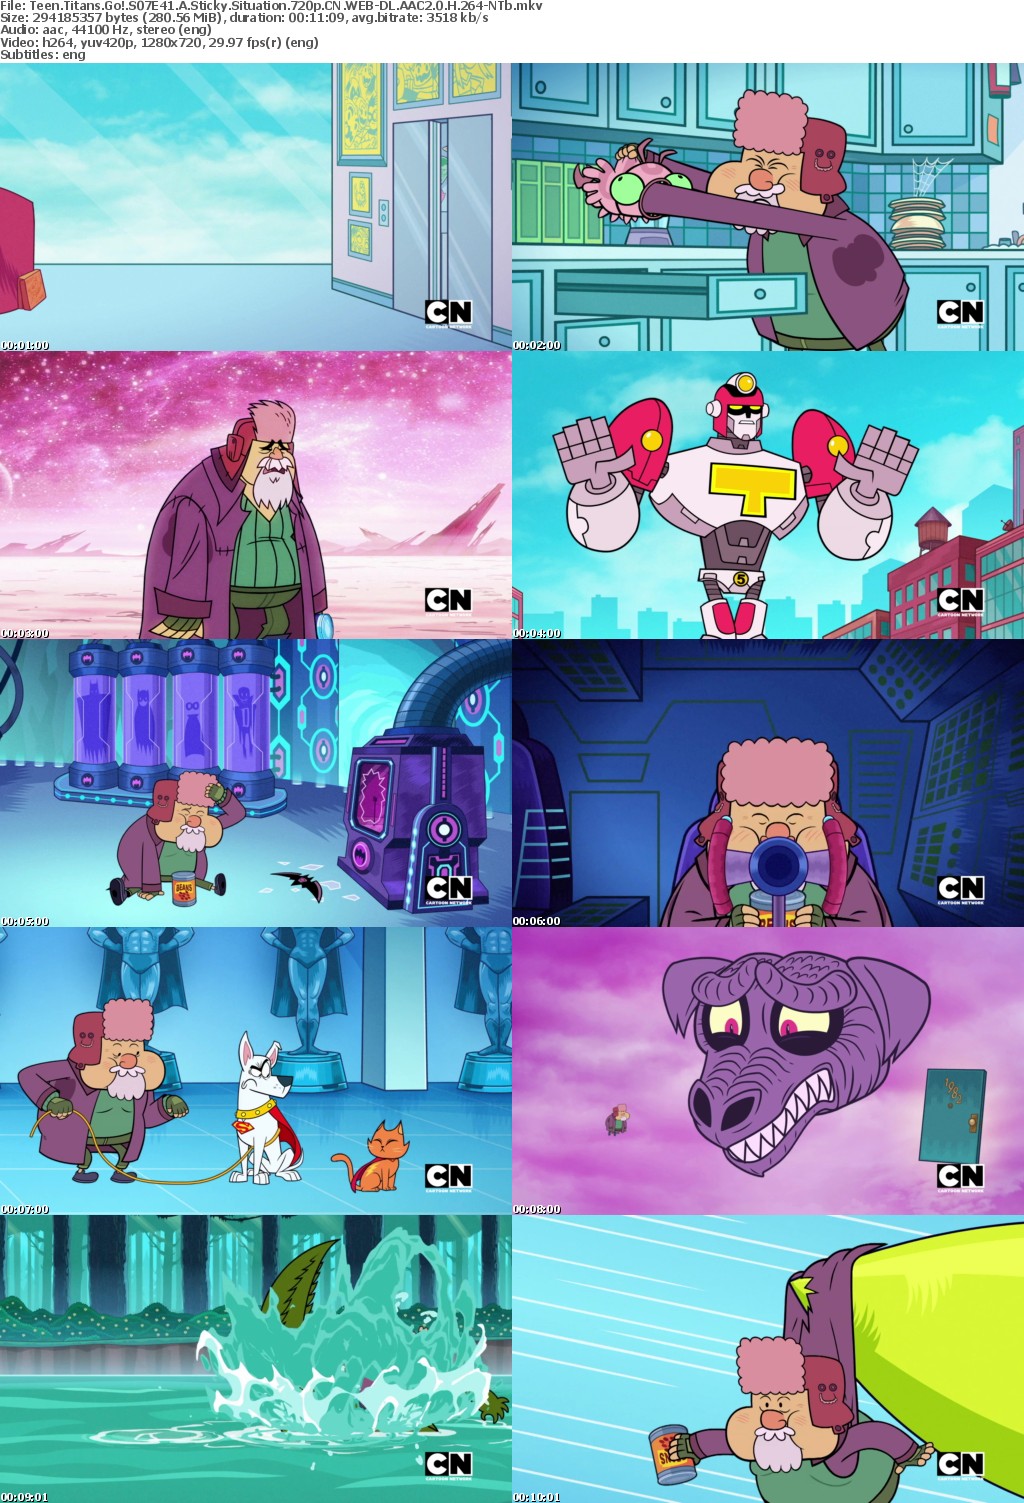 Teen Titans Go S07E41 A Sticky Situation 720p CN WEBRip AAC2 0 H264-NTb